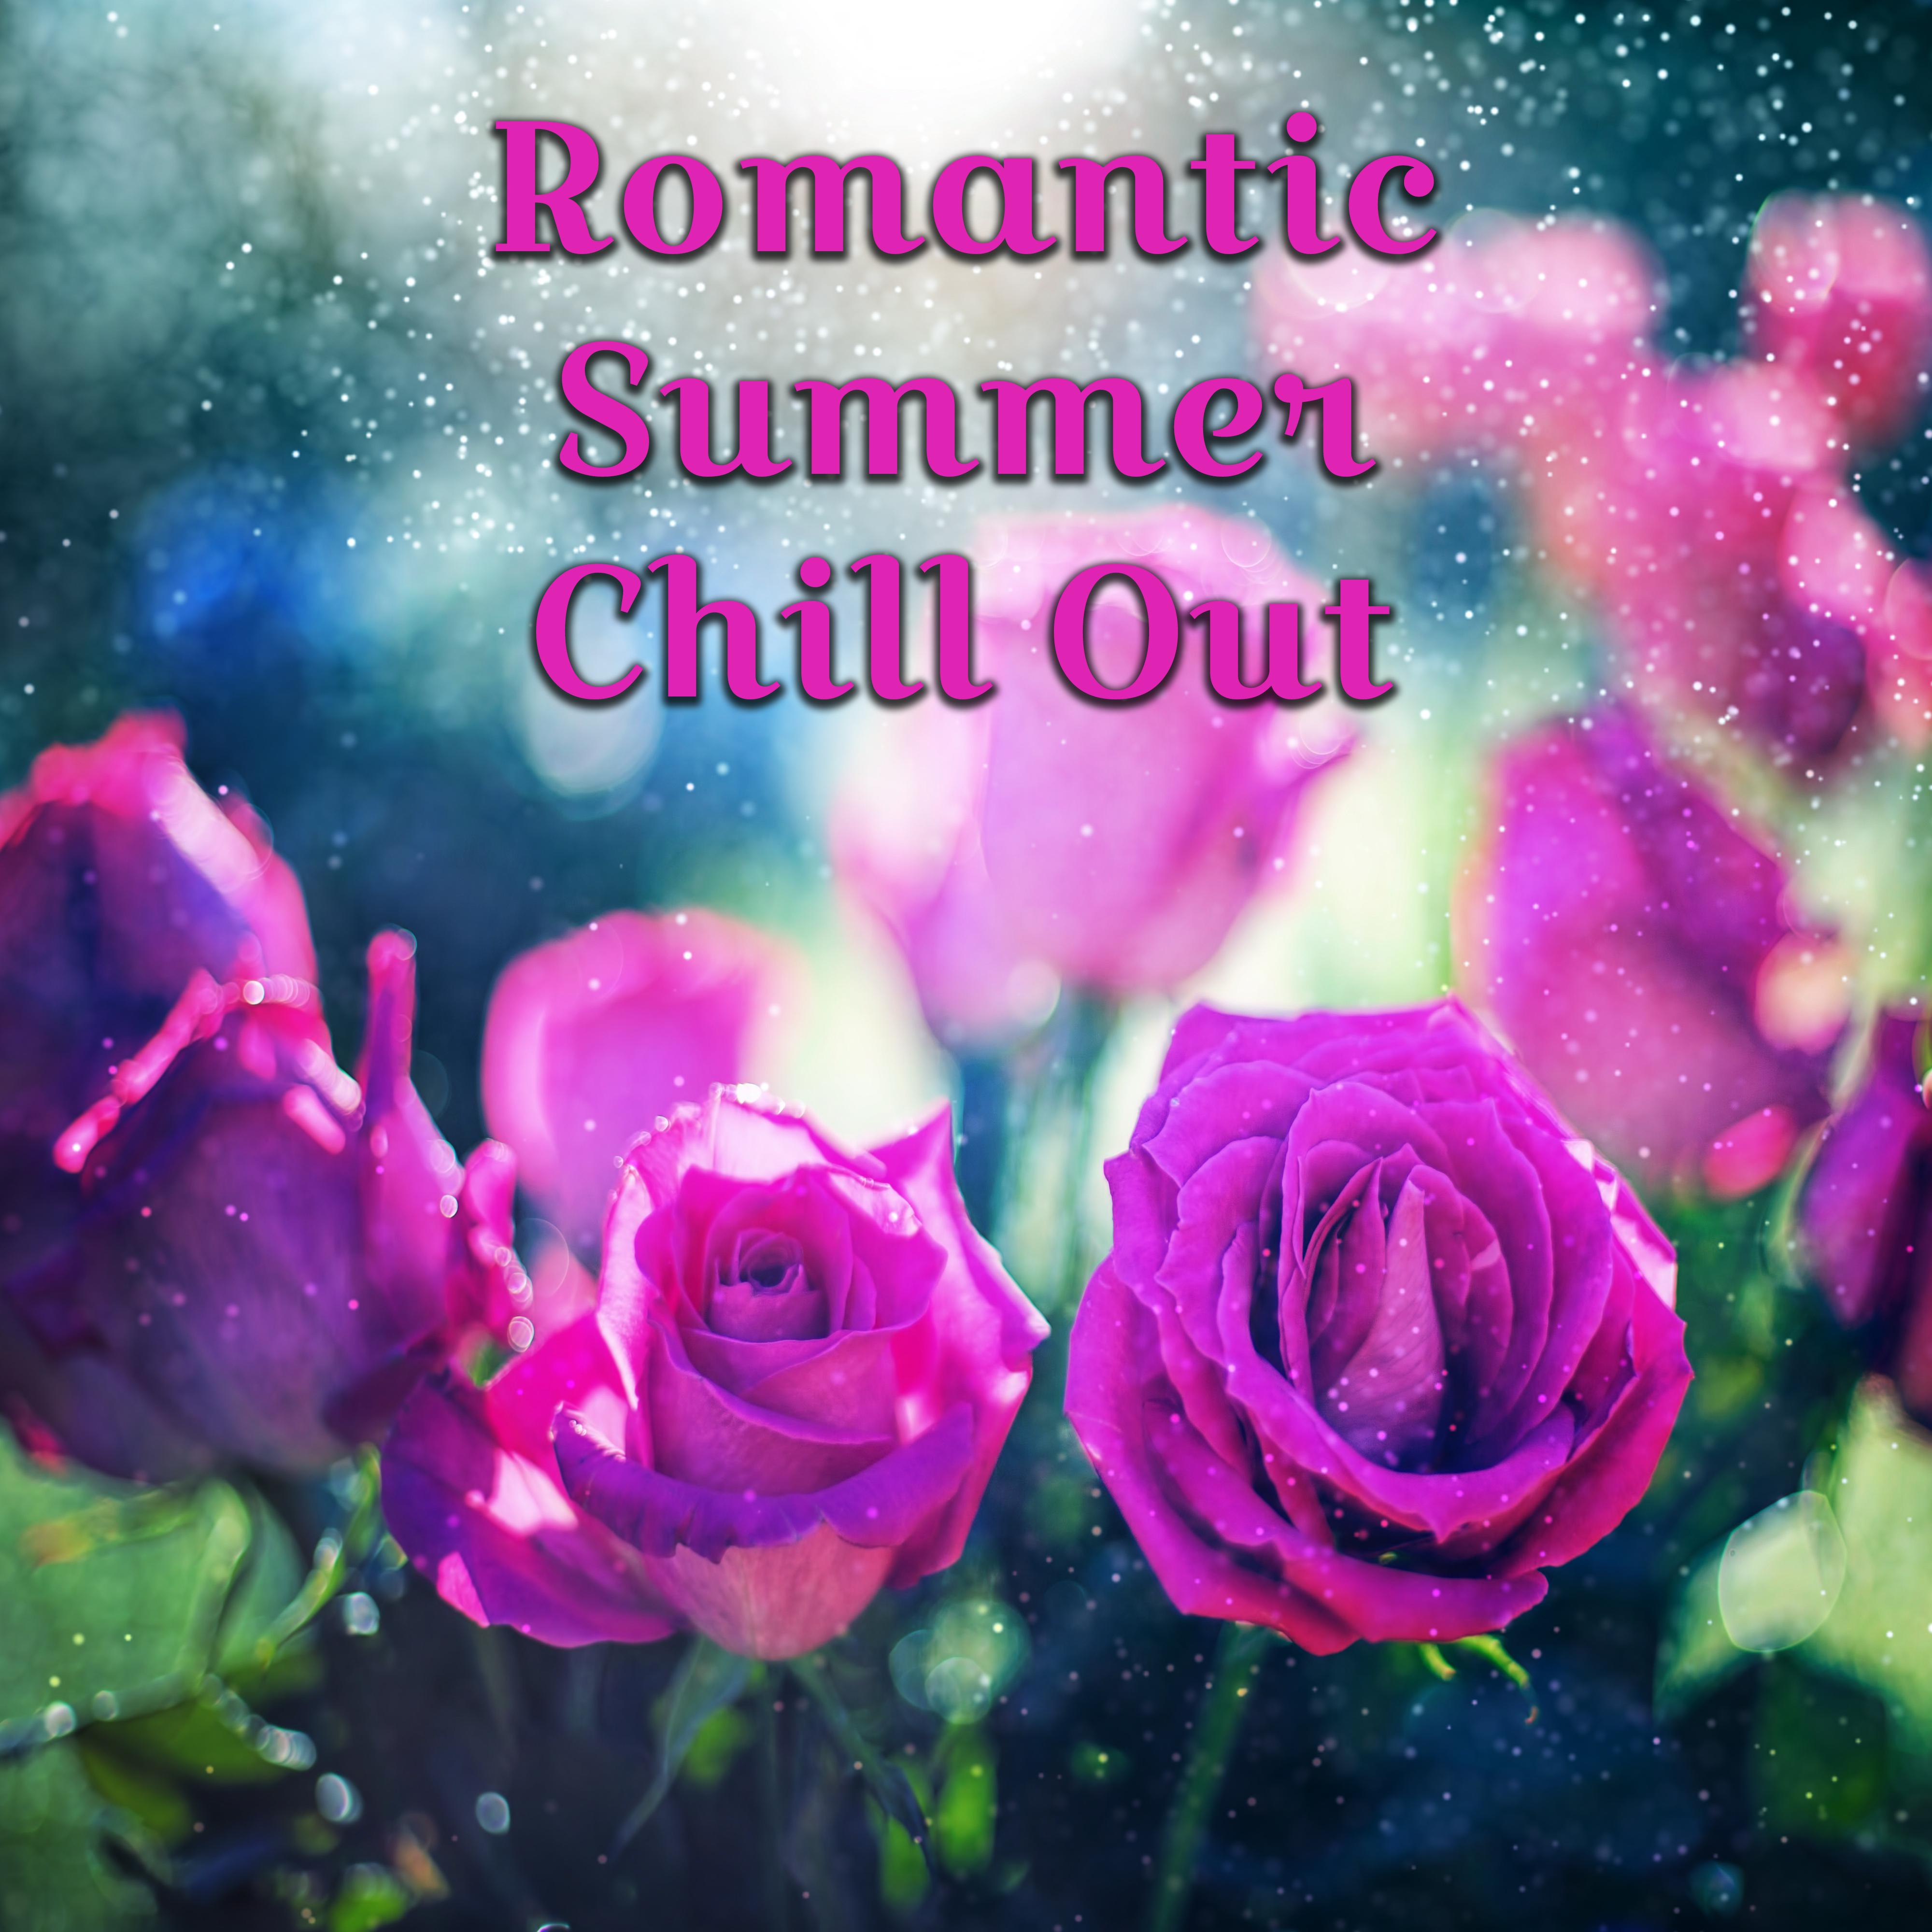 Romantic Summer Chill Out  Chill Out Vibes, Holiday Love, Romantic Summer Sounds